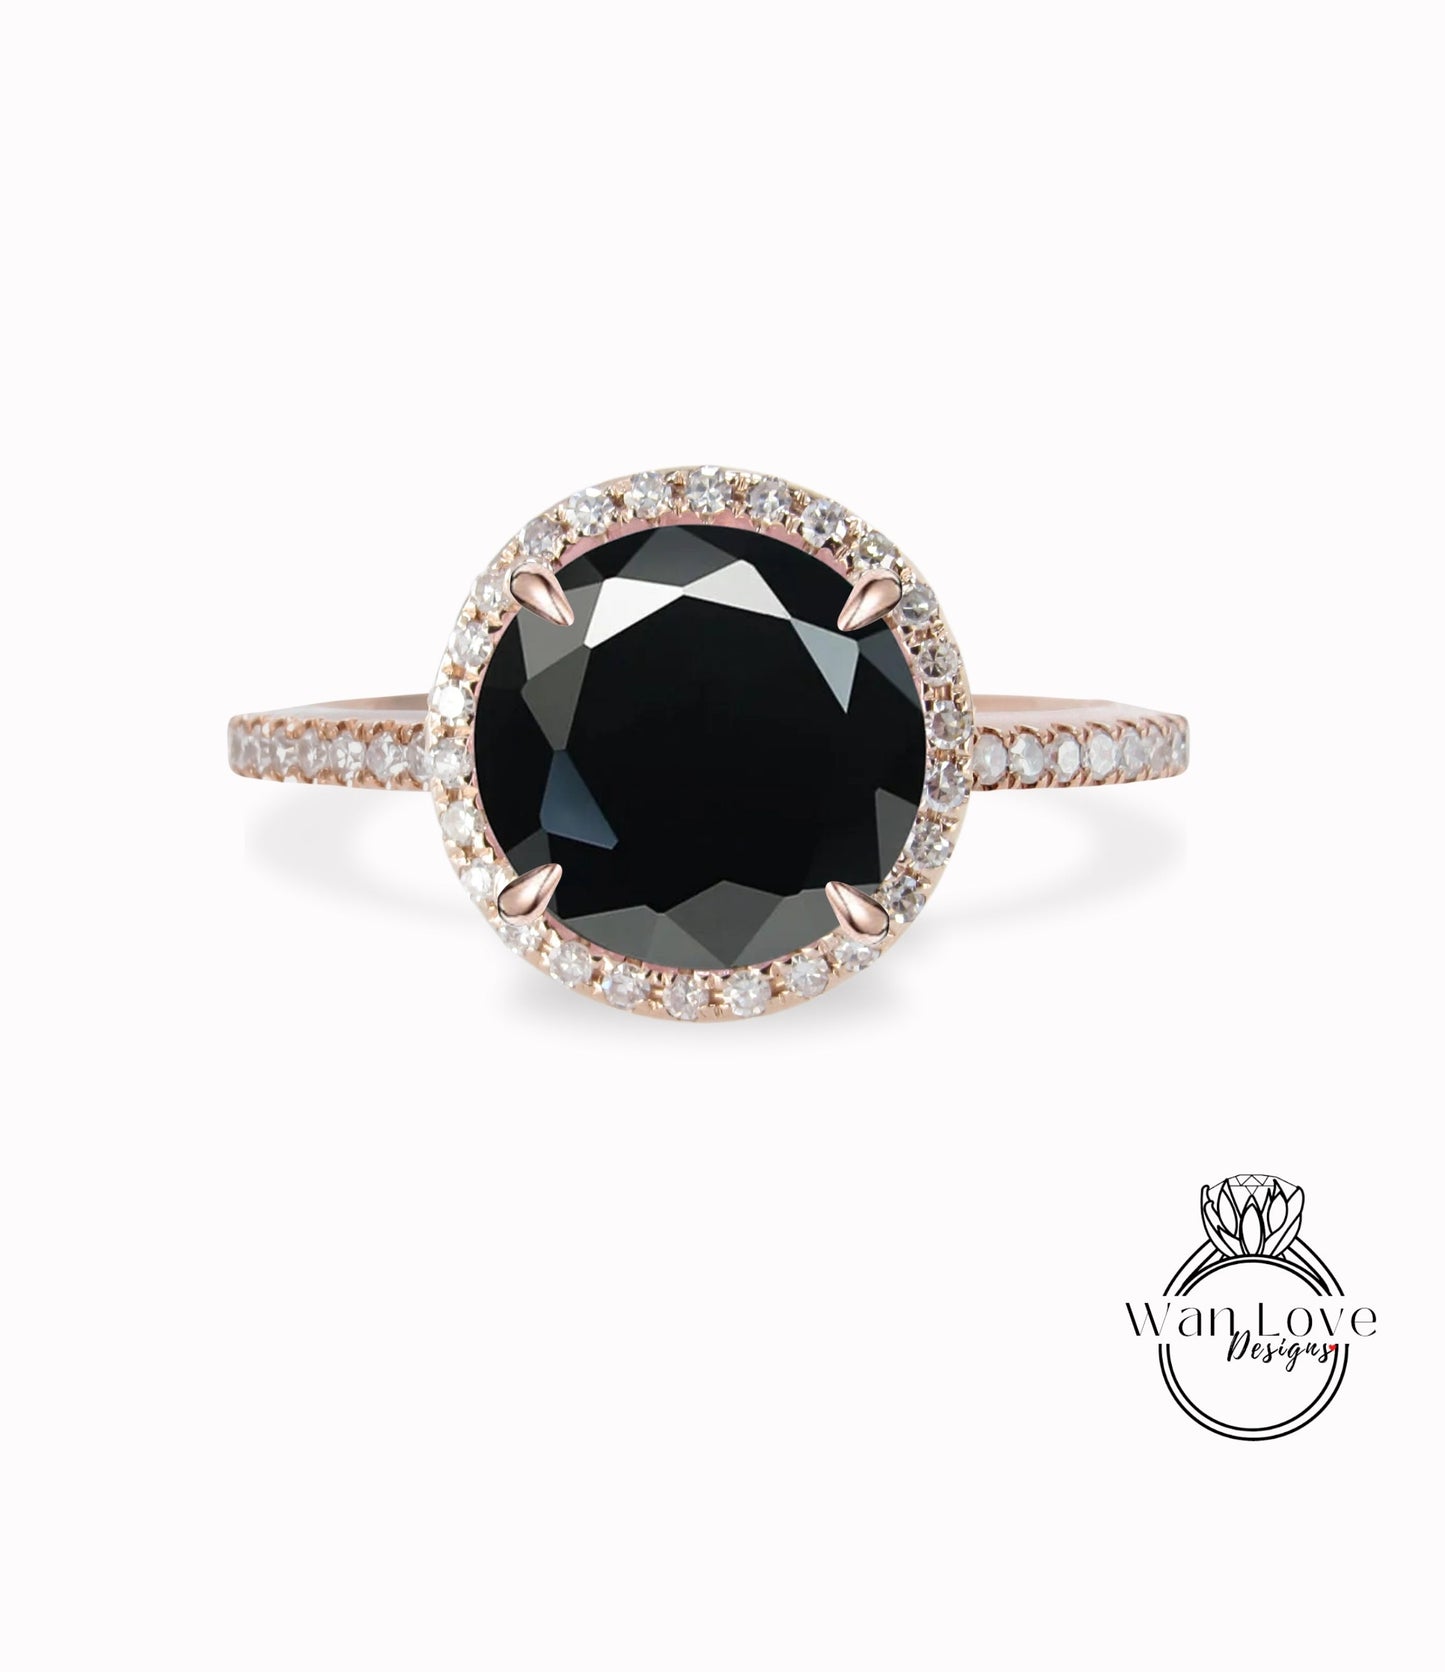 Vintage Black Spinel engagement ring rose gold round cut halo ring art deco diamond halo ring wedding Bridal ring Anniversary promise ring Wan Love Designs